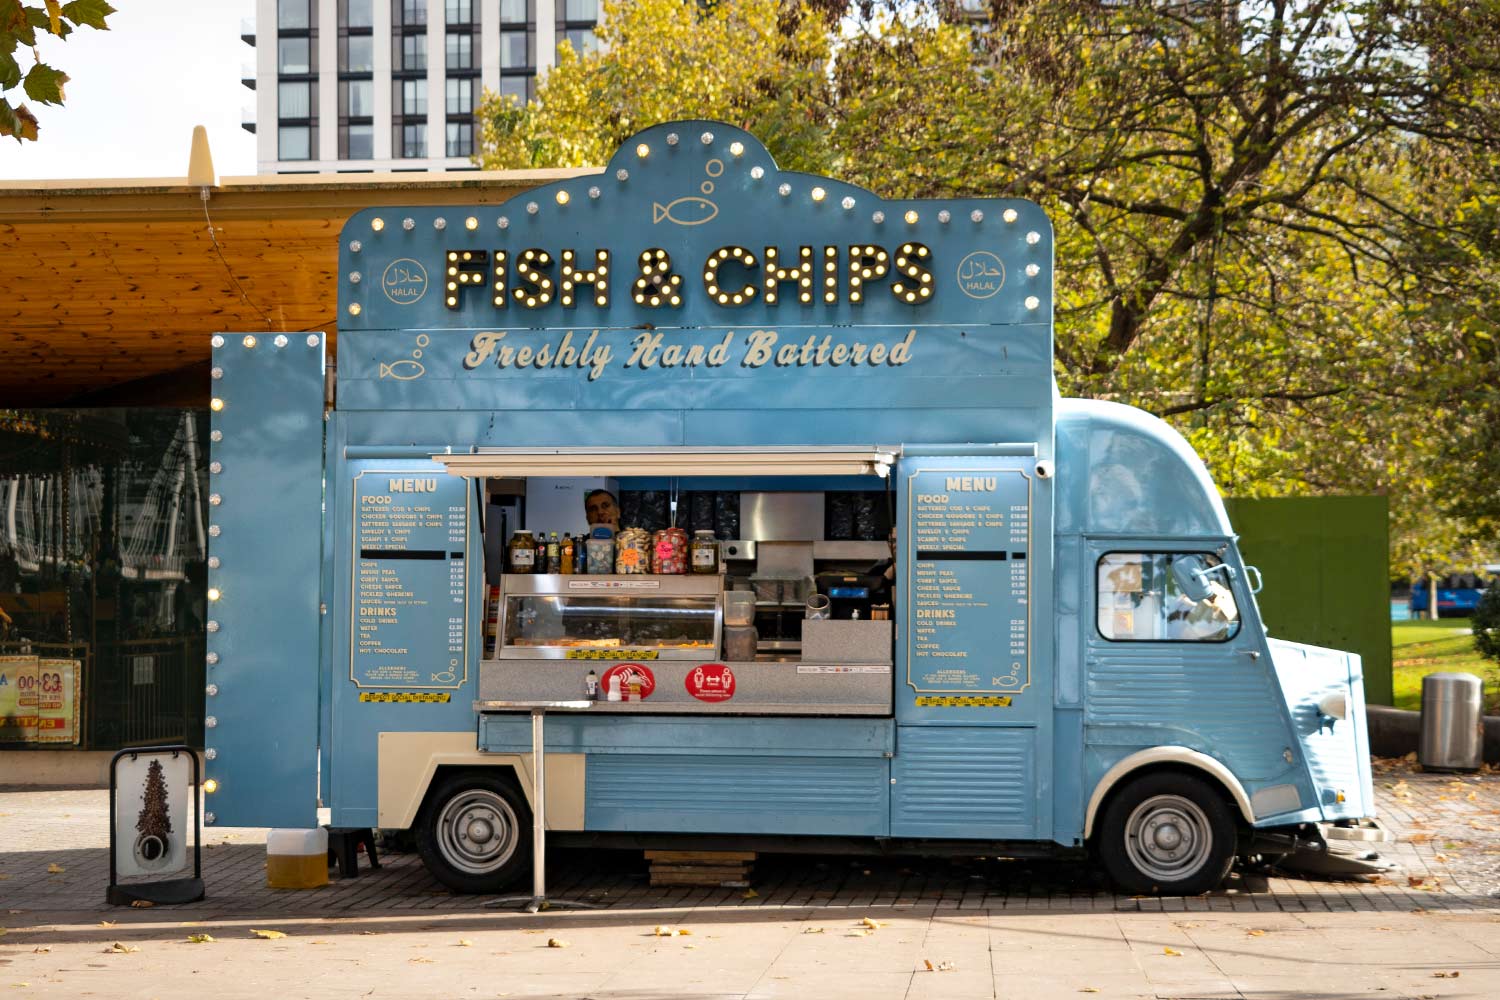 Camion de Fish and Chips, Londres, Angleterre / Fish and Chips Foodtruck, London, England, UK